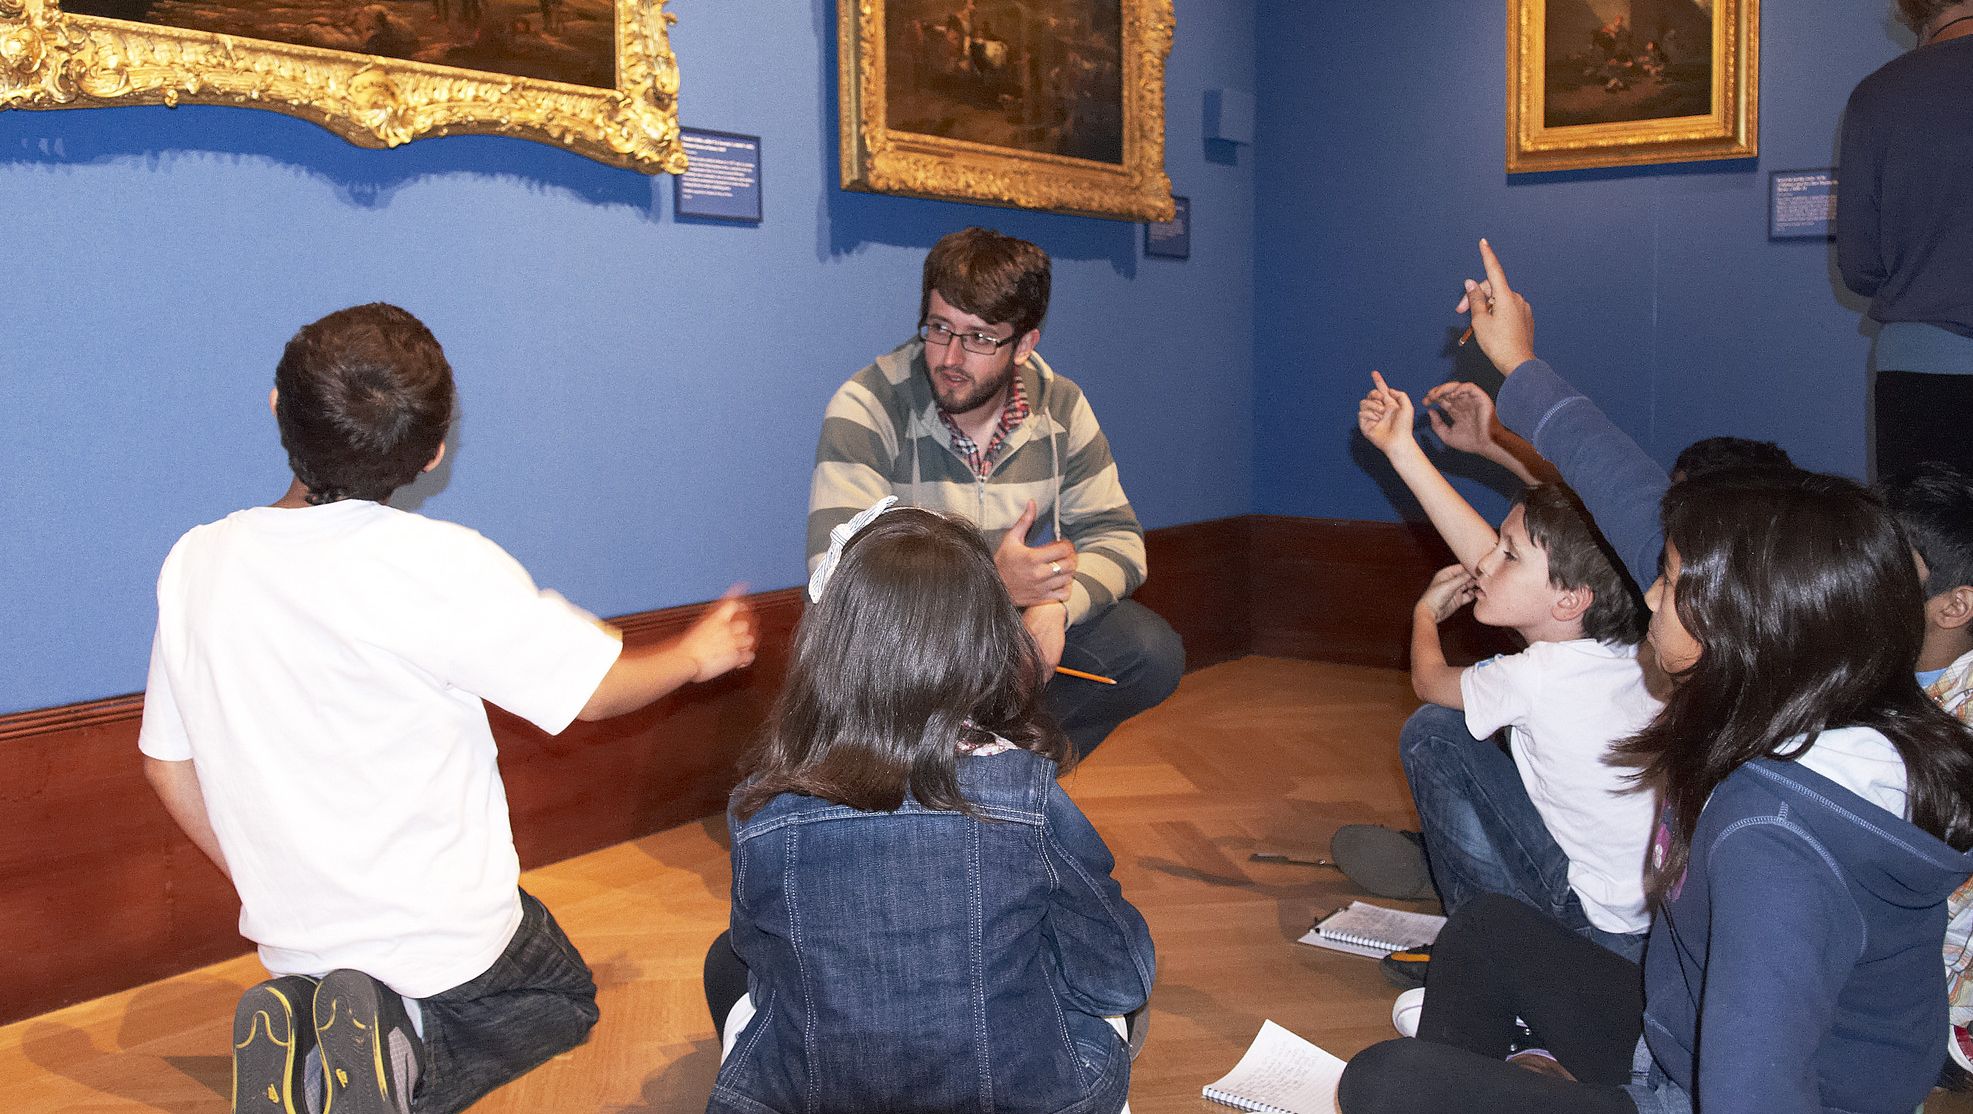 Children participating in a schools' gallery workshop at The Queen's Gallery, Buckingham Palace